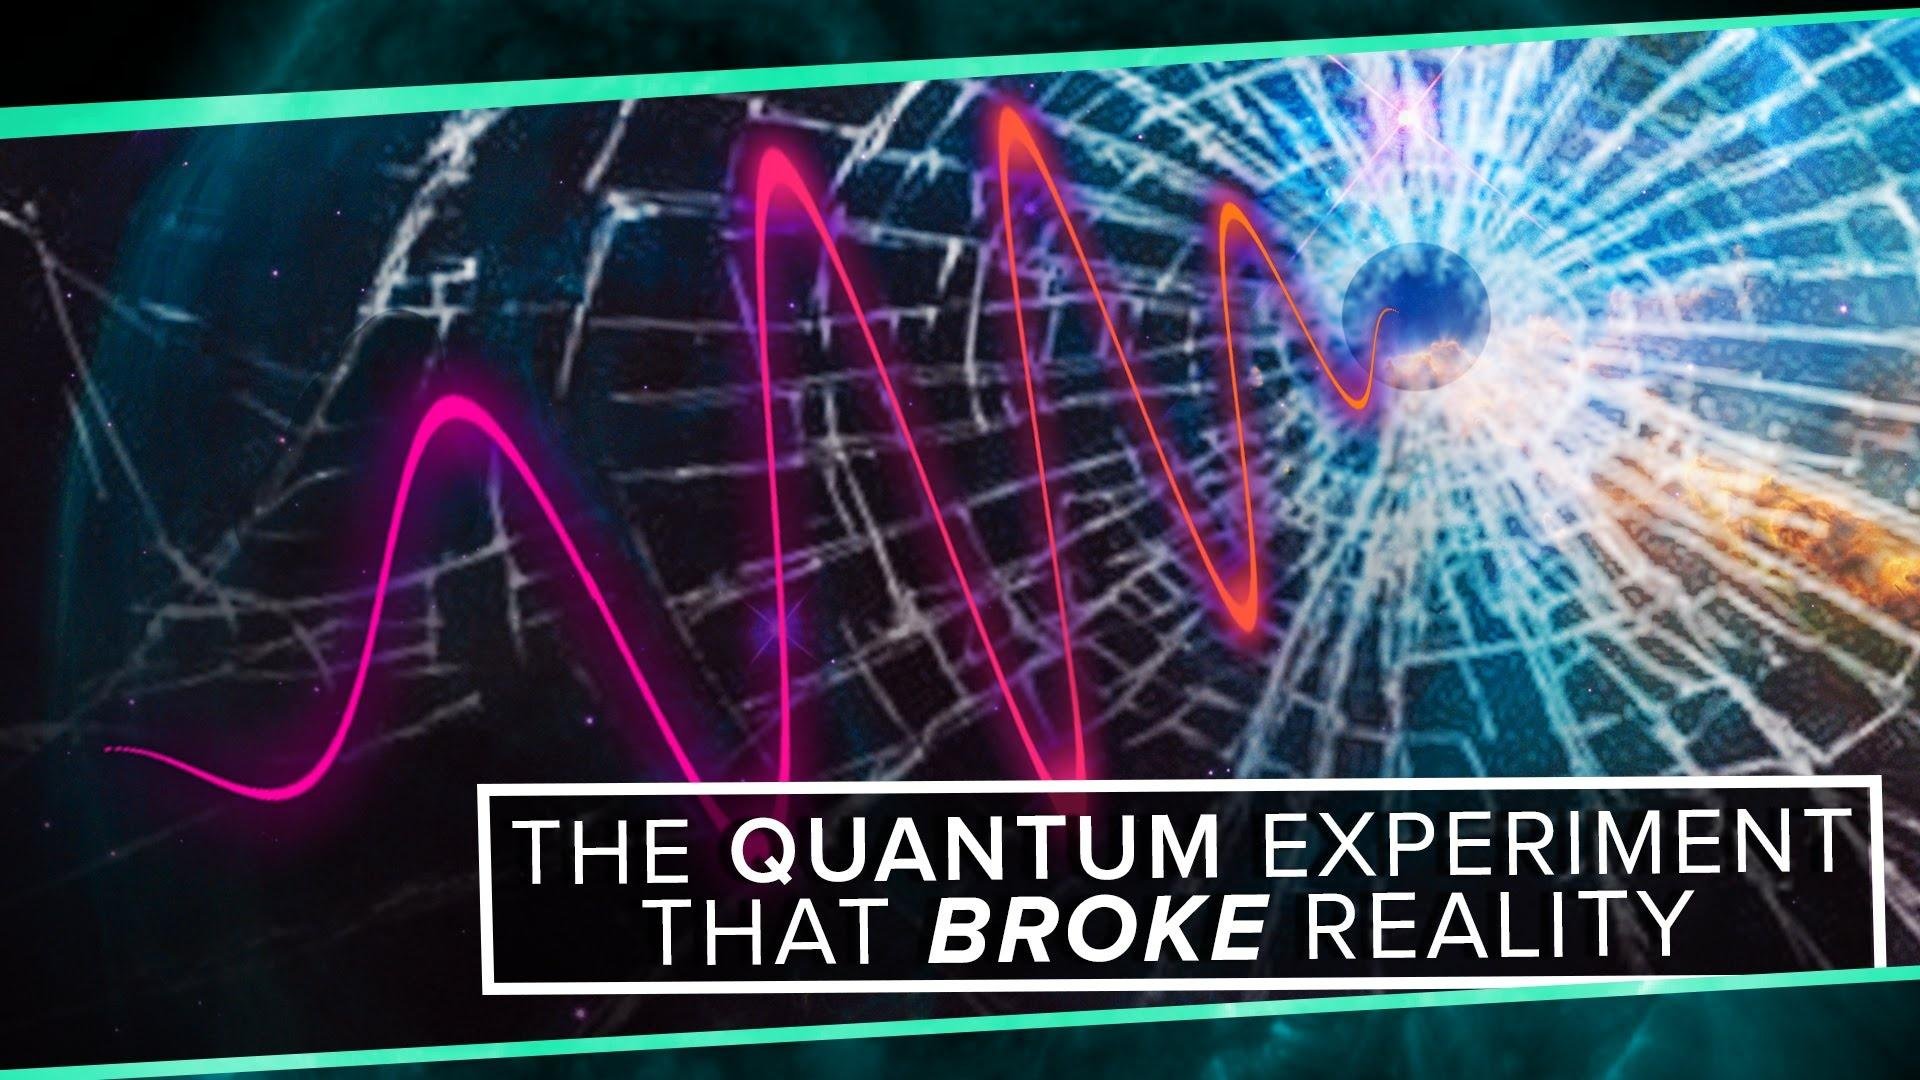 The Quantum Experiment that Broke Reality